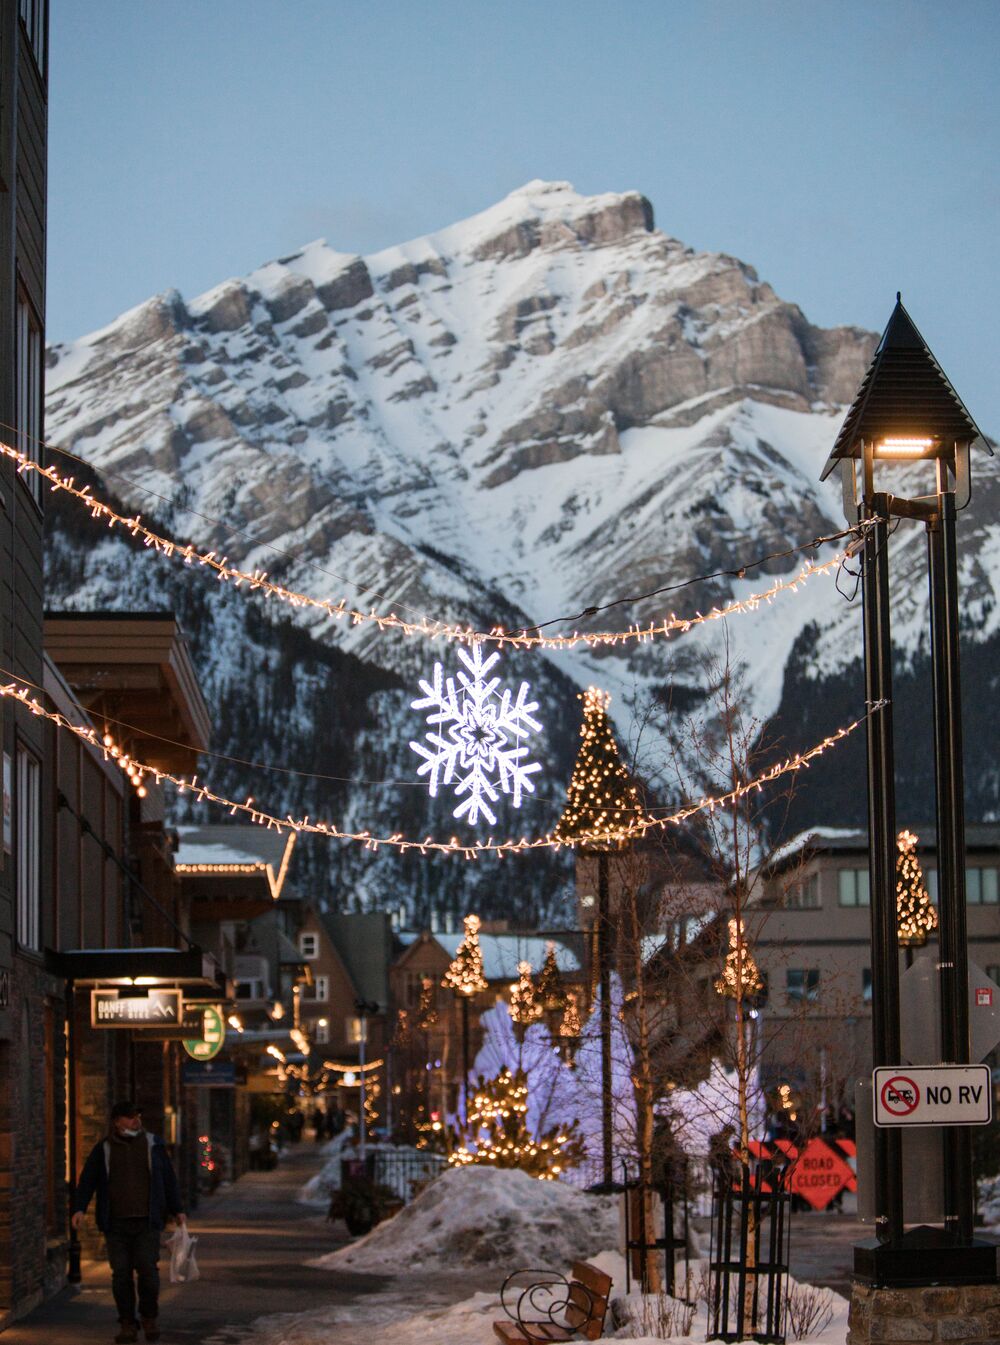 Christmas lights on Banff Ave with Cascade Mountain in the background.